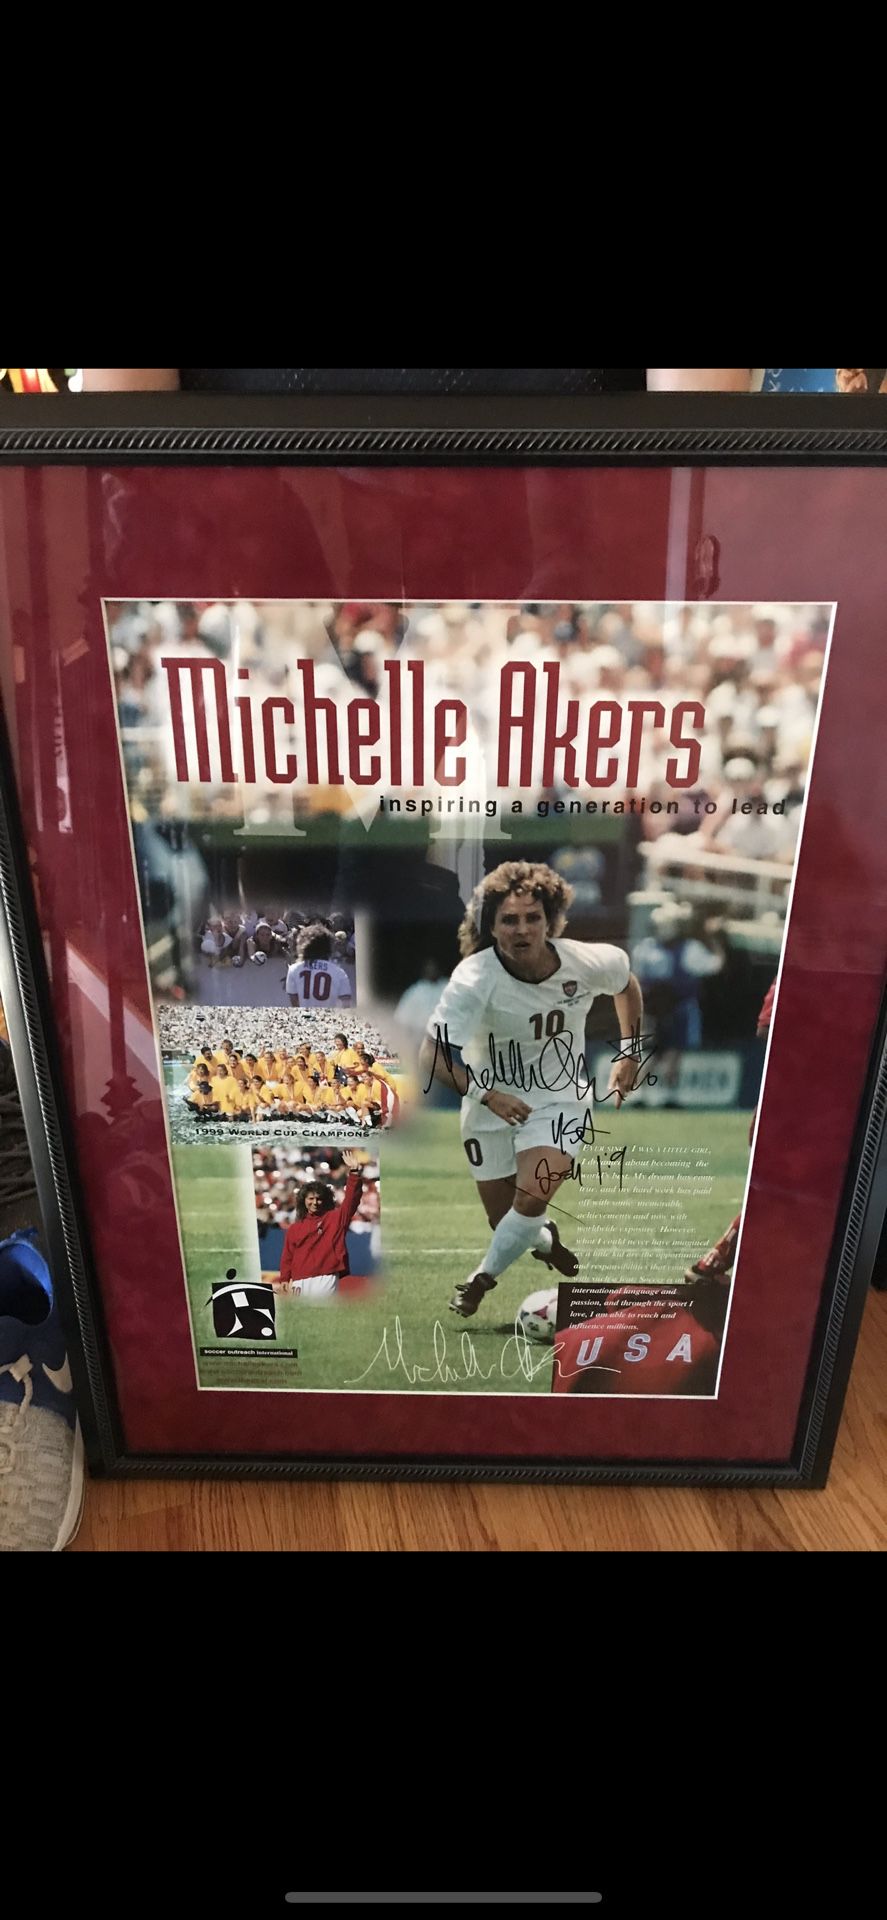 Authentic autograph of Michele Akers Soccer